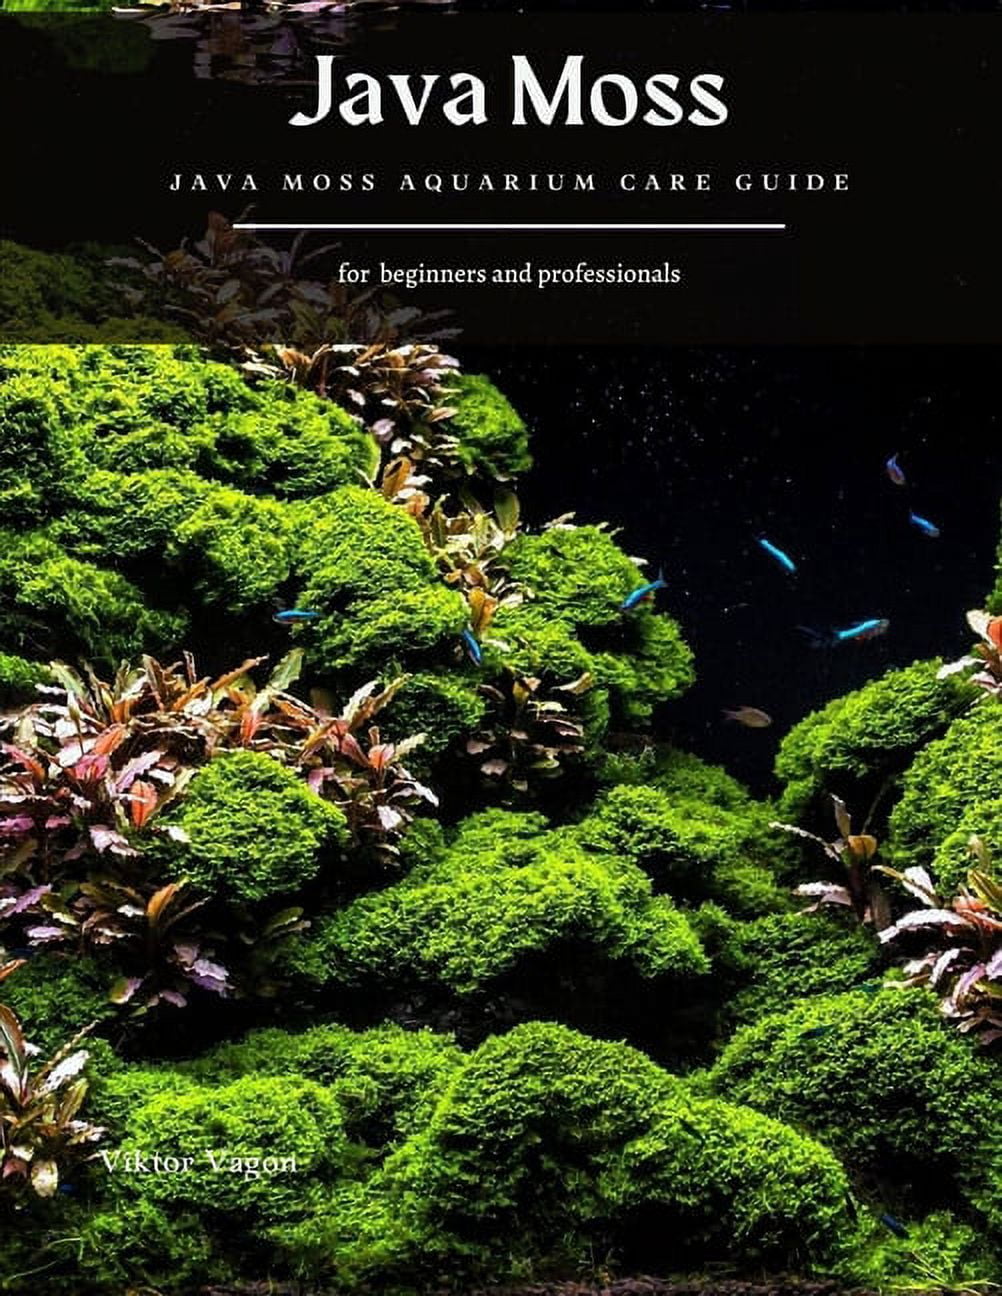 The Complete Care Guide to Java Moss